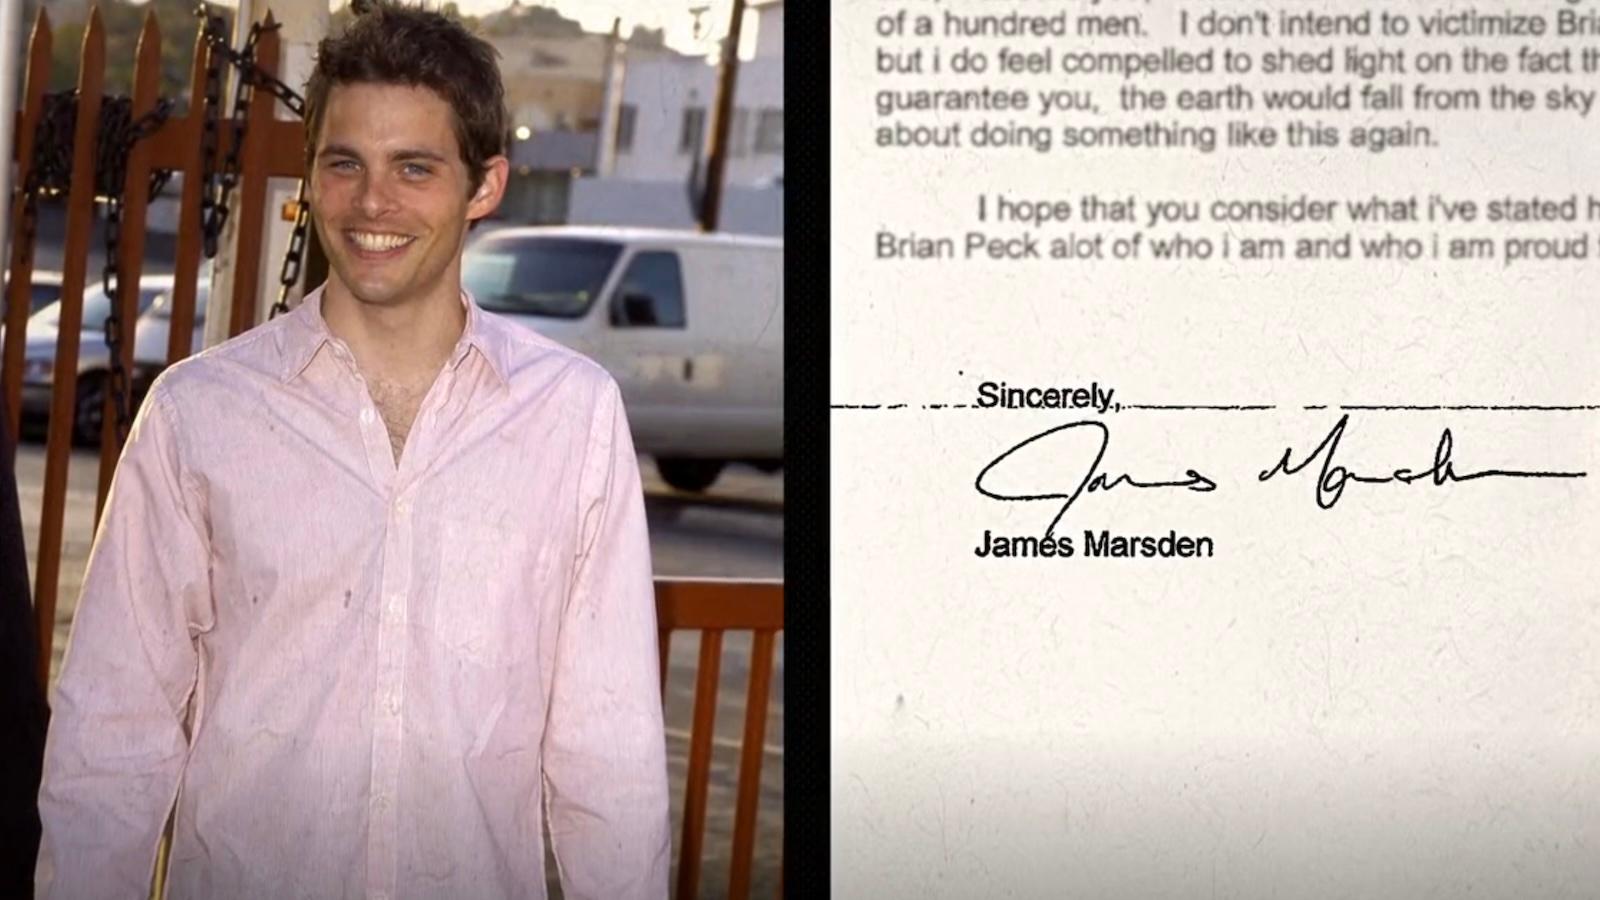 Photo of James Marsden and letter of support for Brian Peck, as shown in Quiet on Set